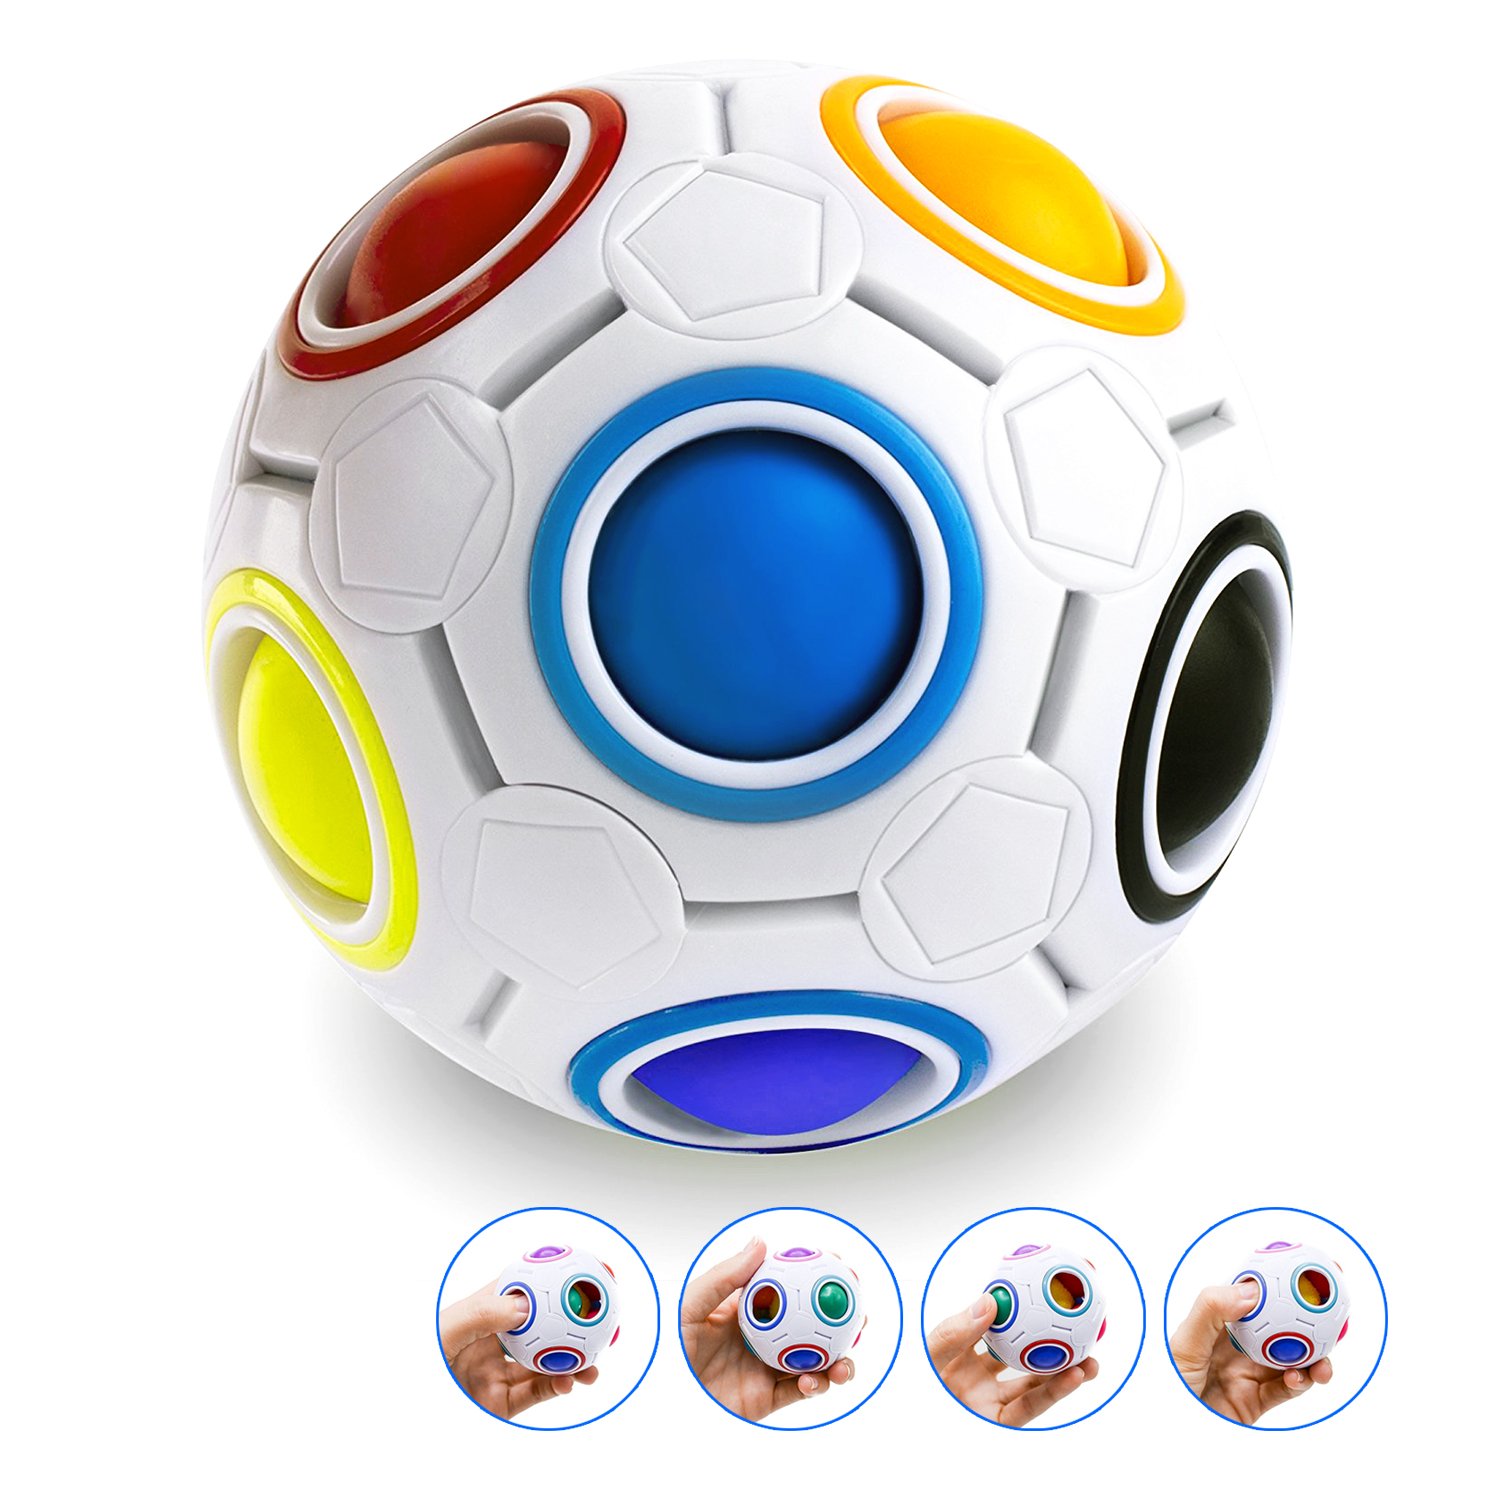 Rainbow Ball WJCY Elimination Ball Game,magic Rainbow Ball Puzzle Cube Fidget Educational Toy,kid Parent Interaction Family Game Toy Set Rainbow Puzzle Magic Chess Toy Set For Kid Adult.